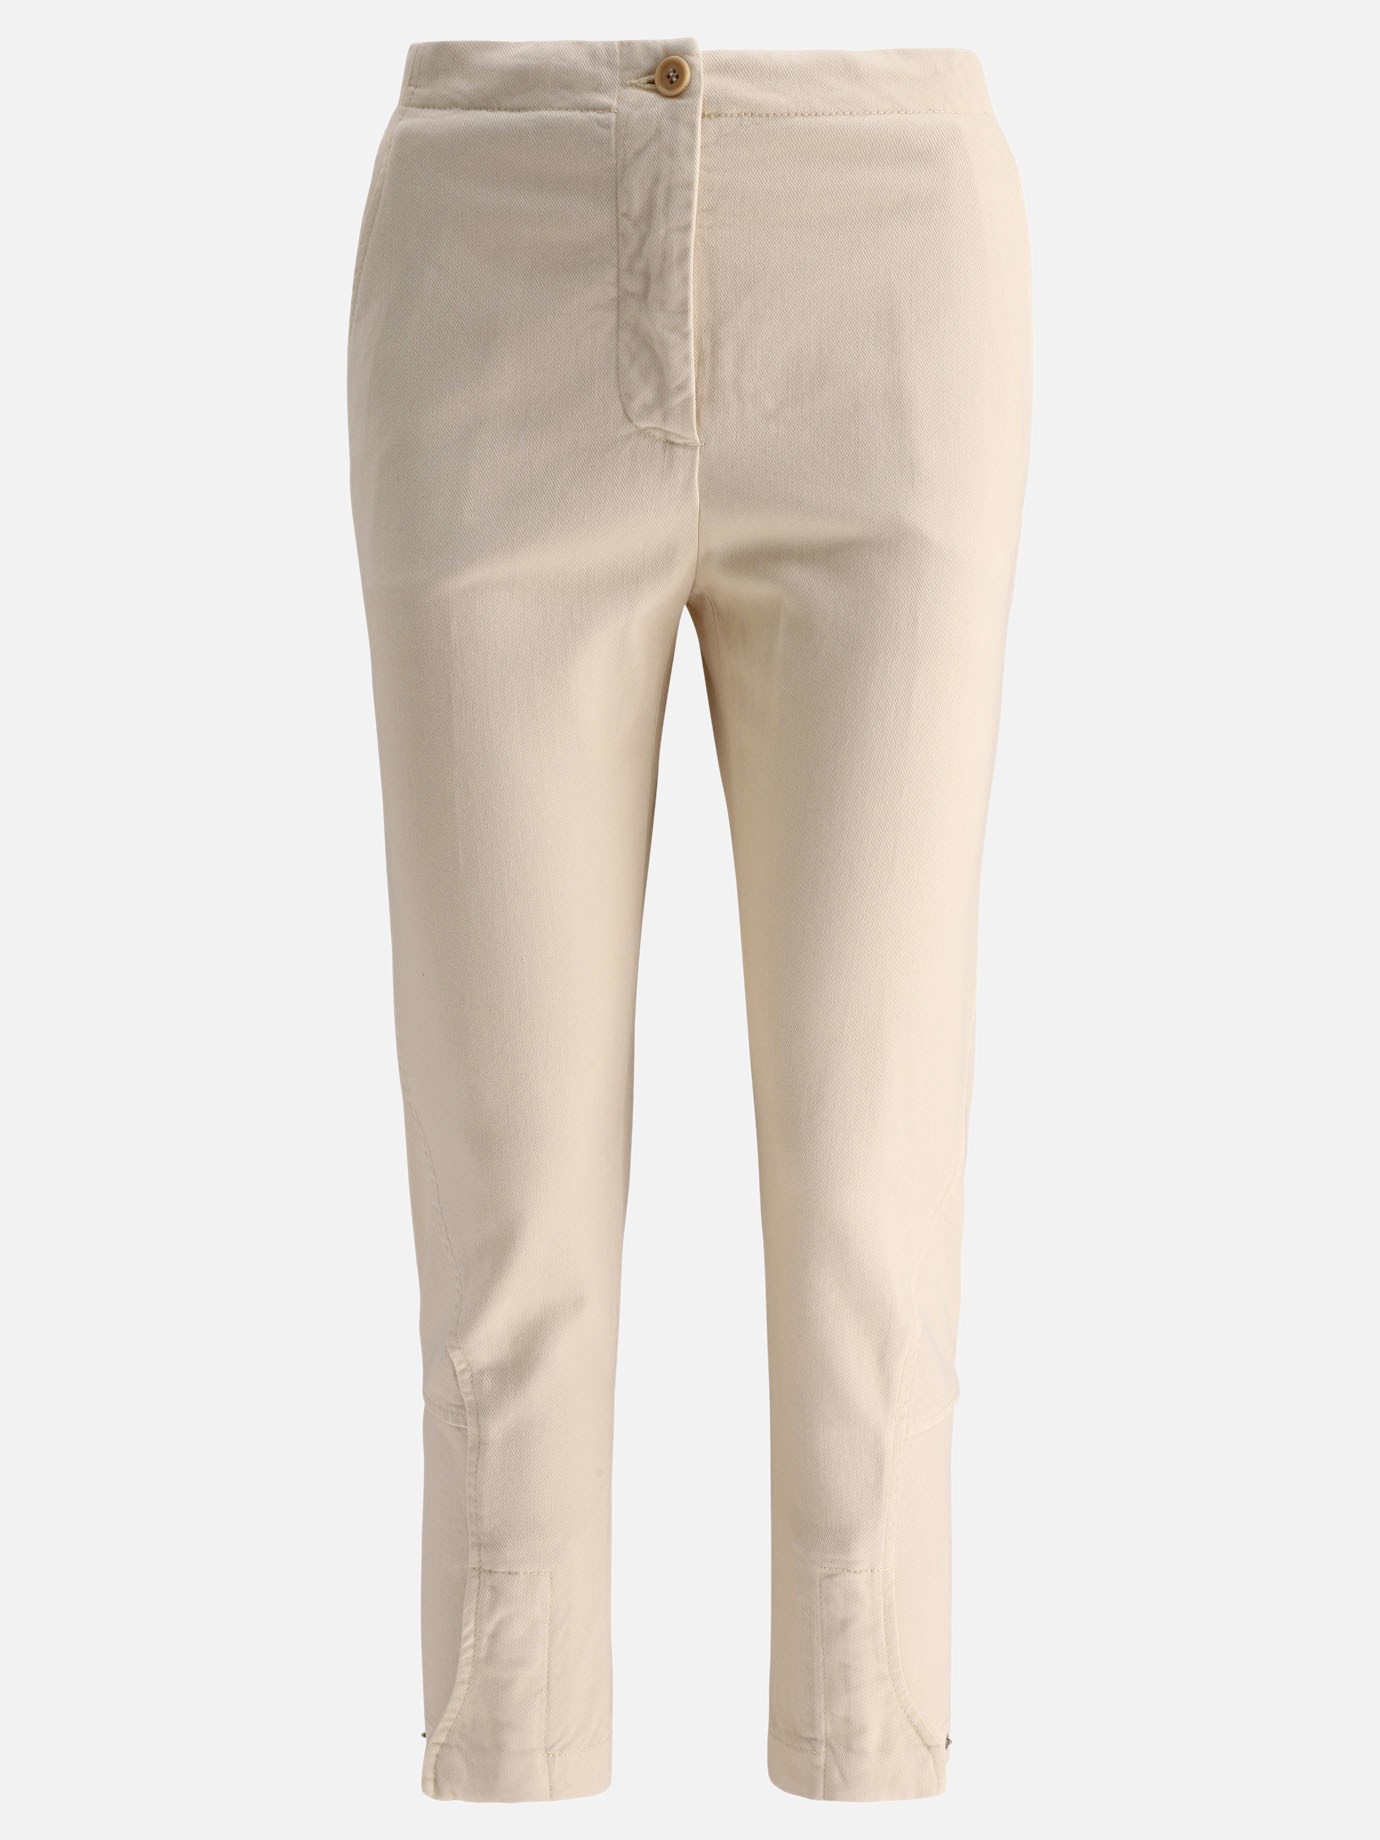 Brushed cotton trousers